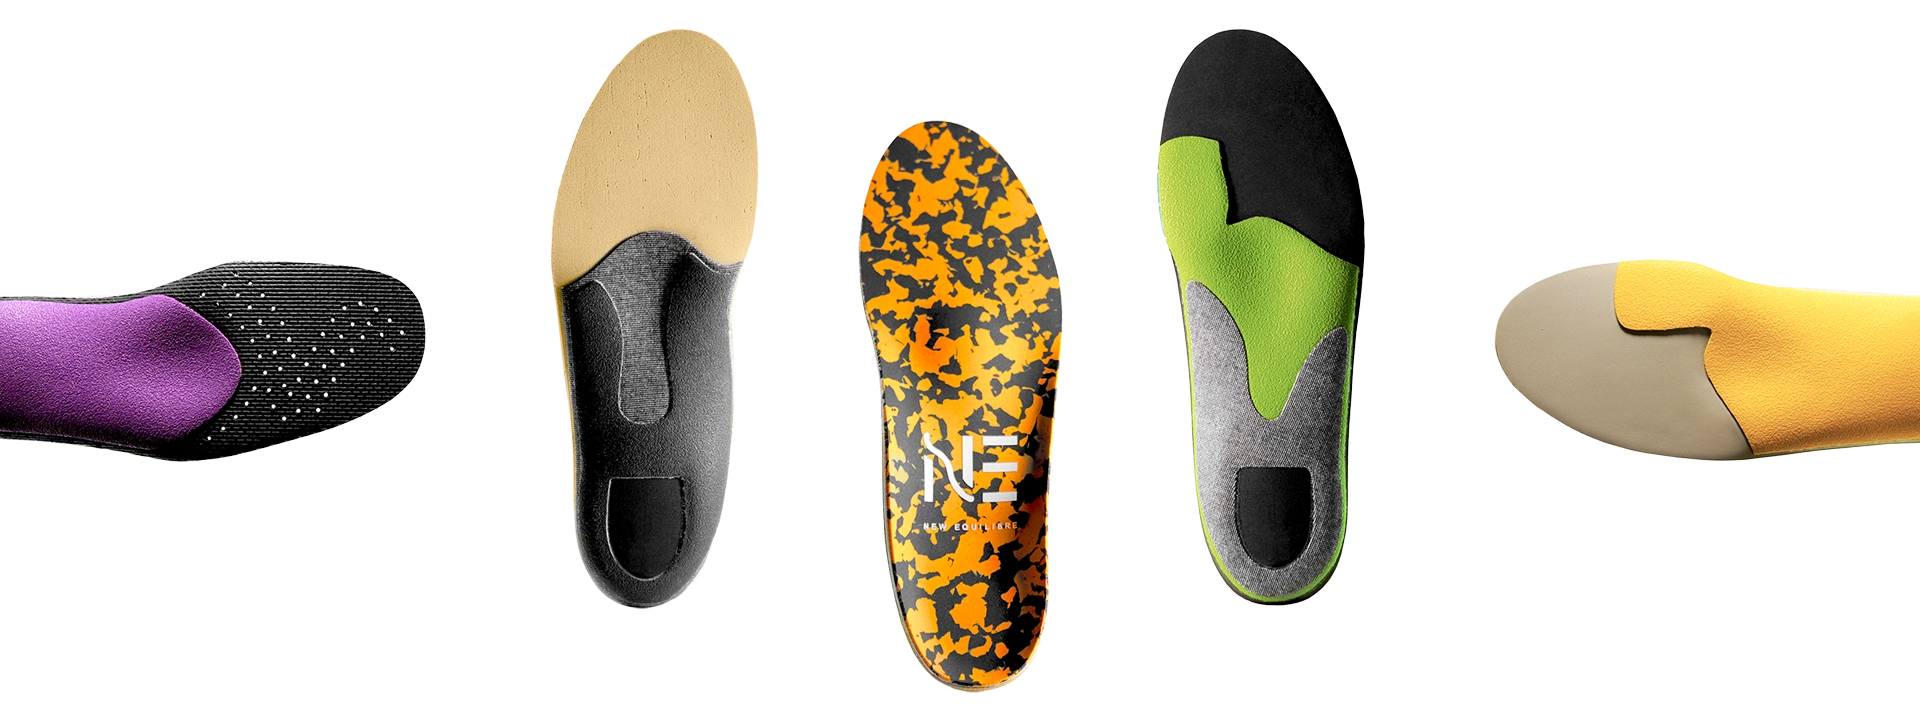 Sport New Equilibre orthopedic insoles